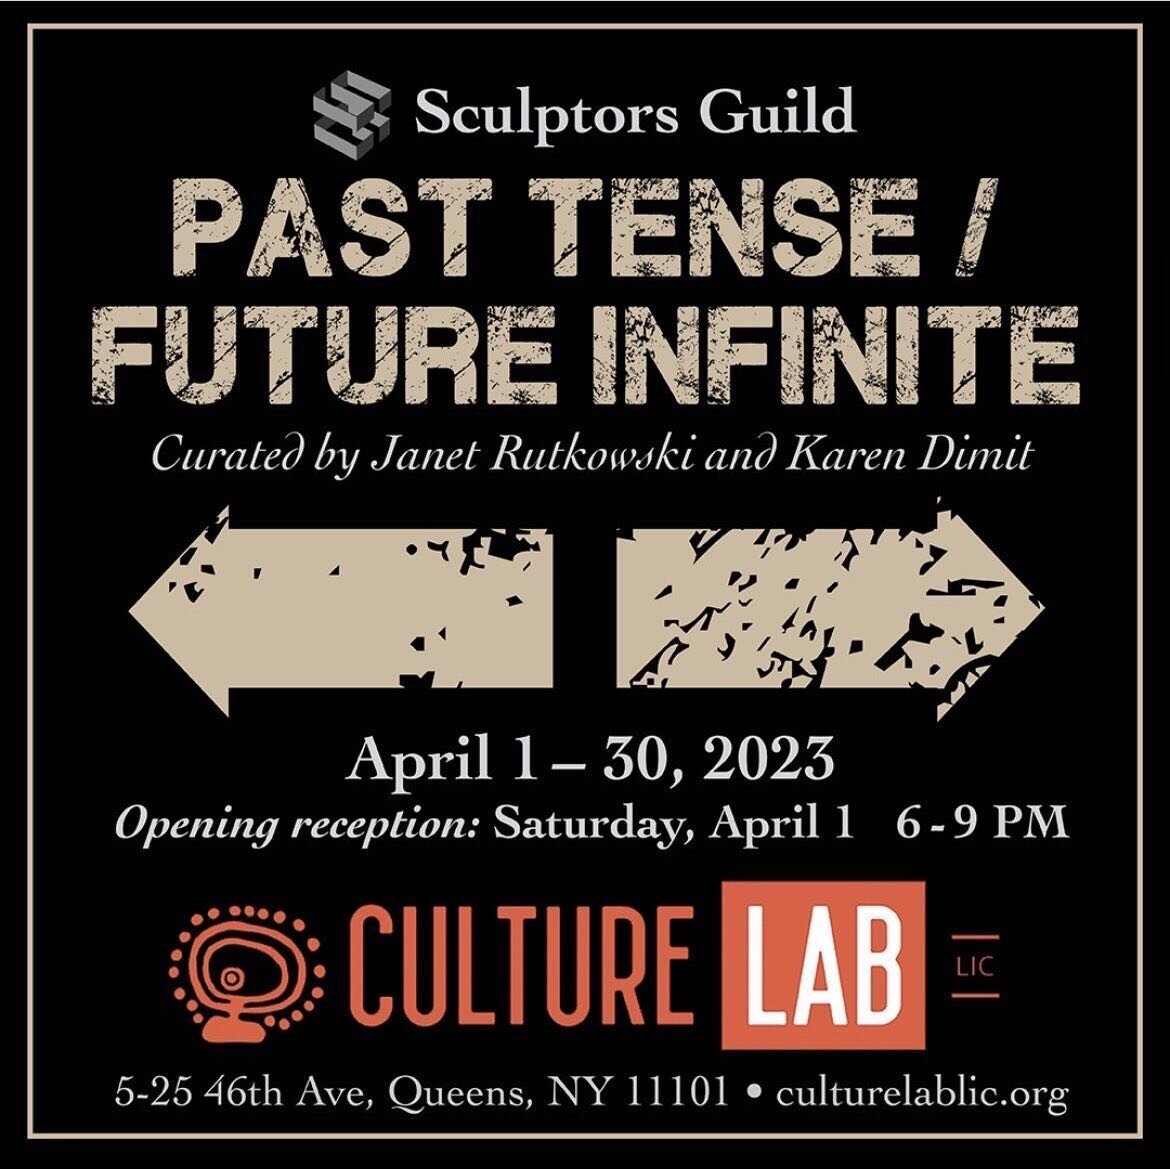 Don't miss the last days of this fabulous Sculptors Guild Show at the Culture Lab @culturelablic, Plaxall Gallery 5-25 46th Avenue, Queens, NY ! Curated by Janet Rutkowski @steelyjan38_bfdstudios and Karen Dimit @kkdimit. @marcbratmansculpture @alber